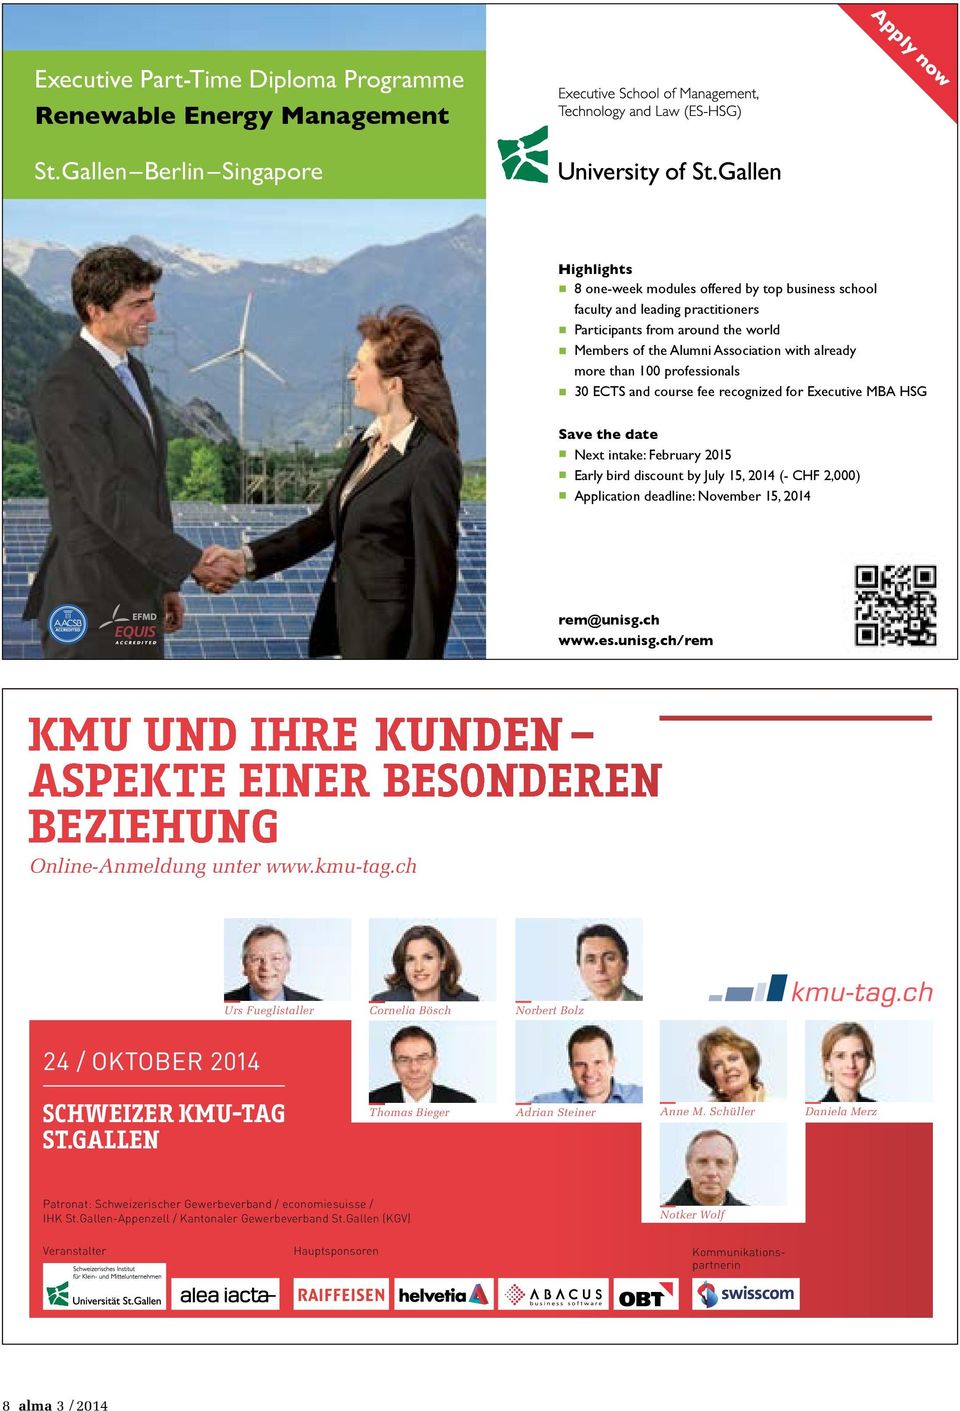 already more than 100 professionals 30 ECTS and course fee recognized for Executive MBA HSG Save the date Next intake: February 2015 Early bird discount by July 15, 2014 (- CHF 2,000) Application